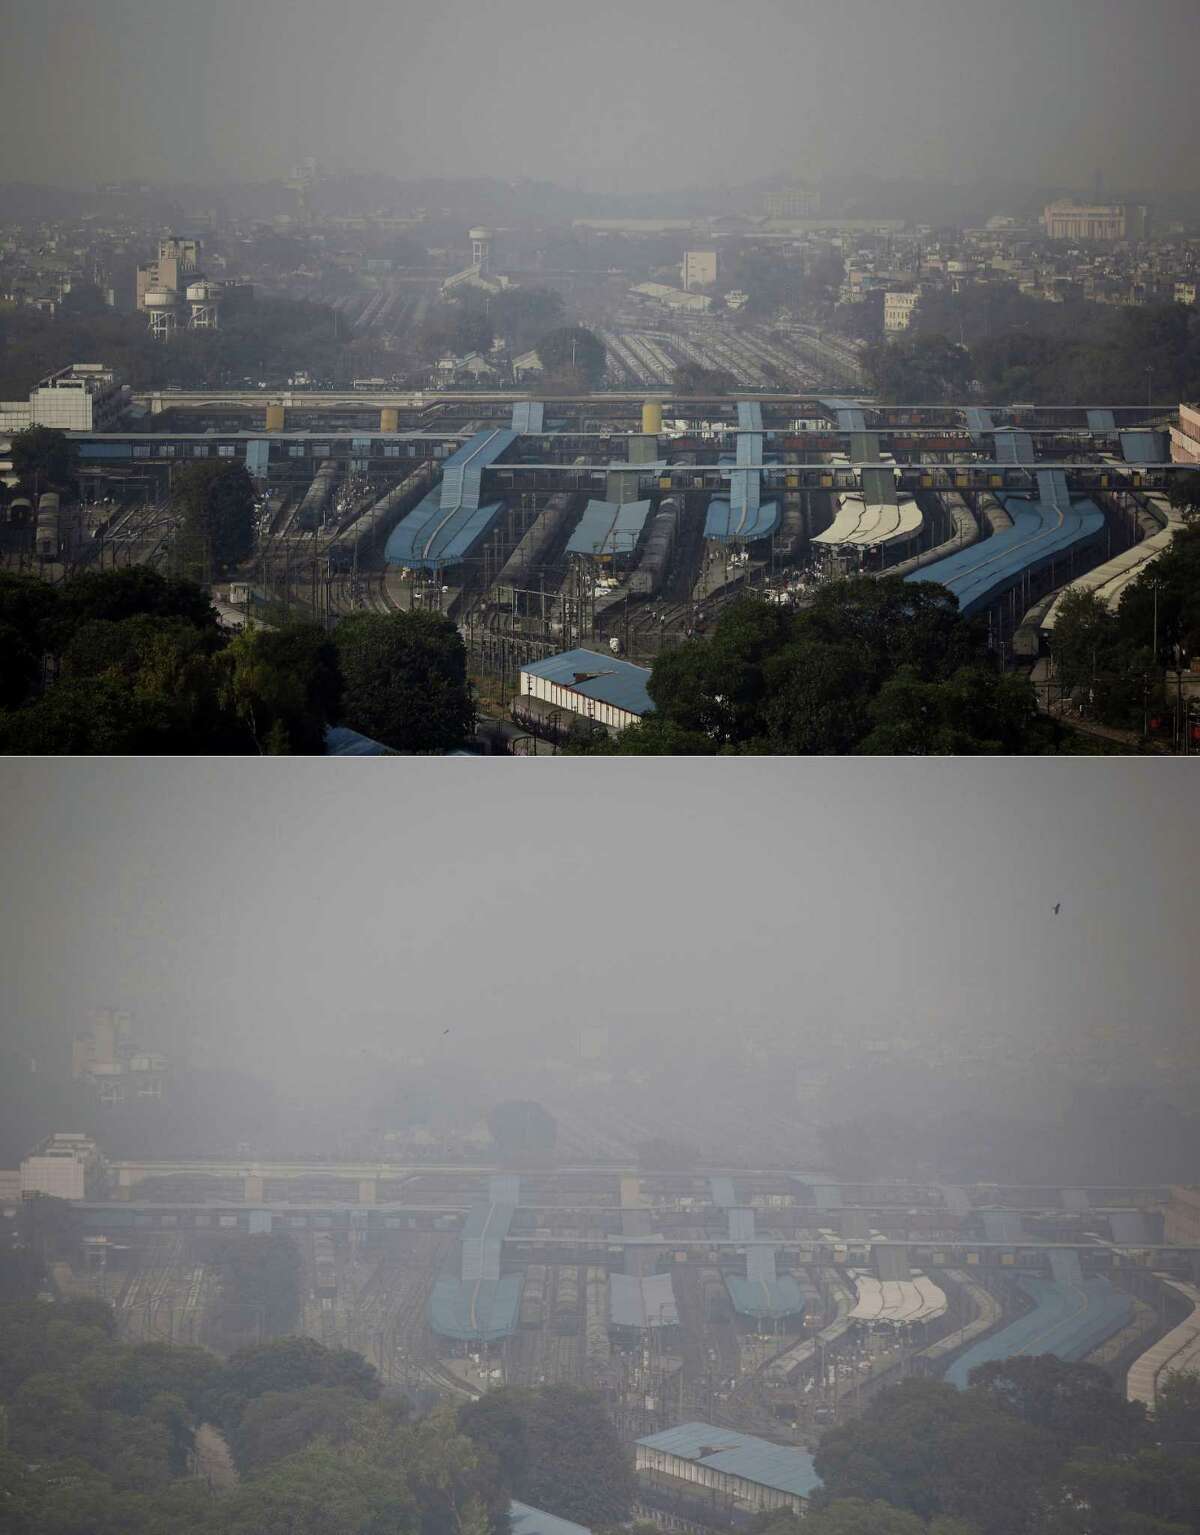 In this combination of two photos, the New Delhi skyline is seen enveloped in smog over a railway station on Oct. 28, 2016, top, and a day after Diwali festival on Oct. 31, 2016, bottom. As Indians wake Monday to smoke-filled skies from a weekend of festival fireworks for the Hindu holiday of Diwali, New Delhi’s worst season for air pollution begins, with dire consequences. A new report from UNICEF says about a third of the 2 billion children in the world who are breathing toxic air live in northern India and neighboring countries, risking serious health effects including damage to their lungs, brains and other organs.